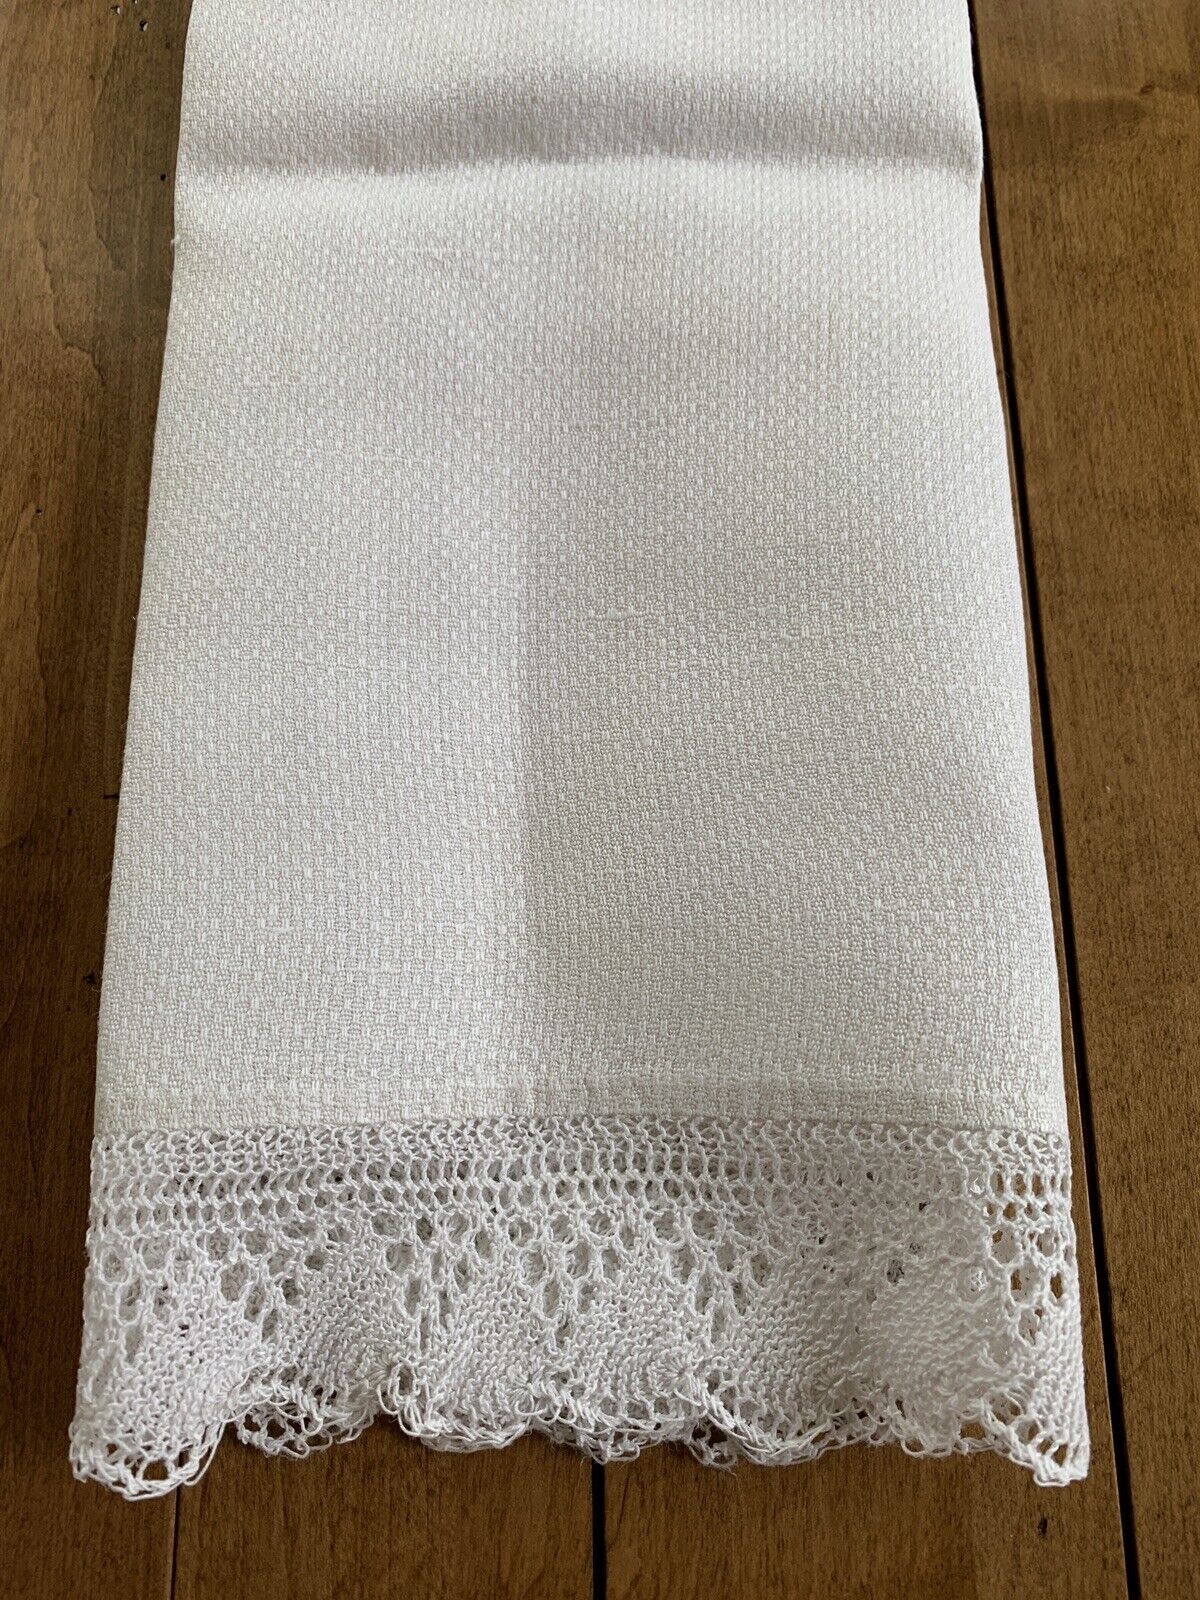 Vintage White Crocheted Lace Edge Huck Cotton Hand Towel ~ 15” x 36” ~ Beautiful